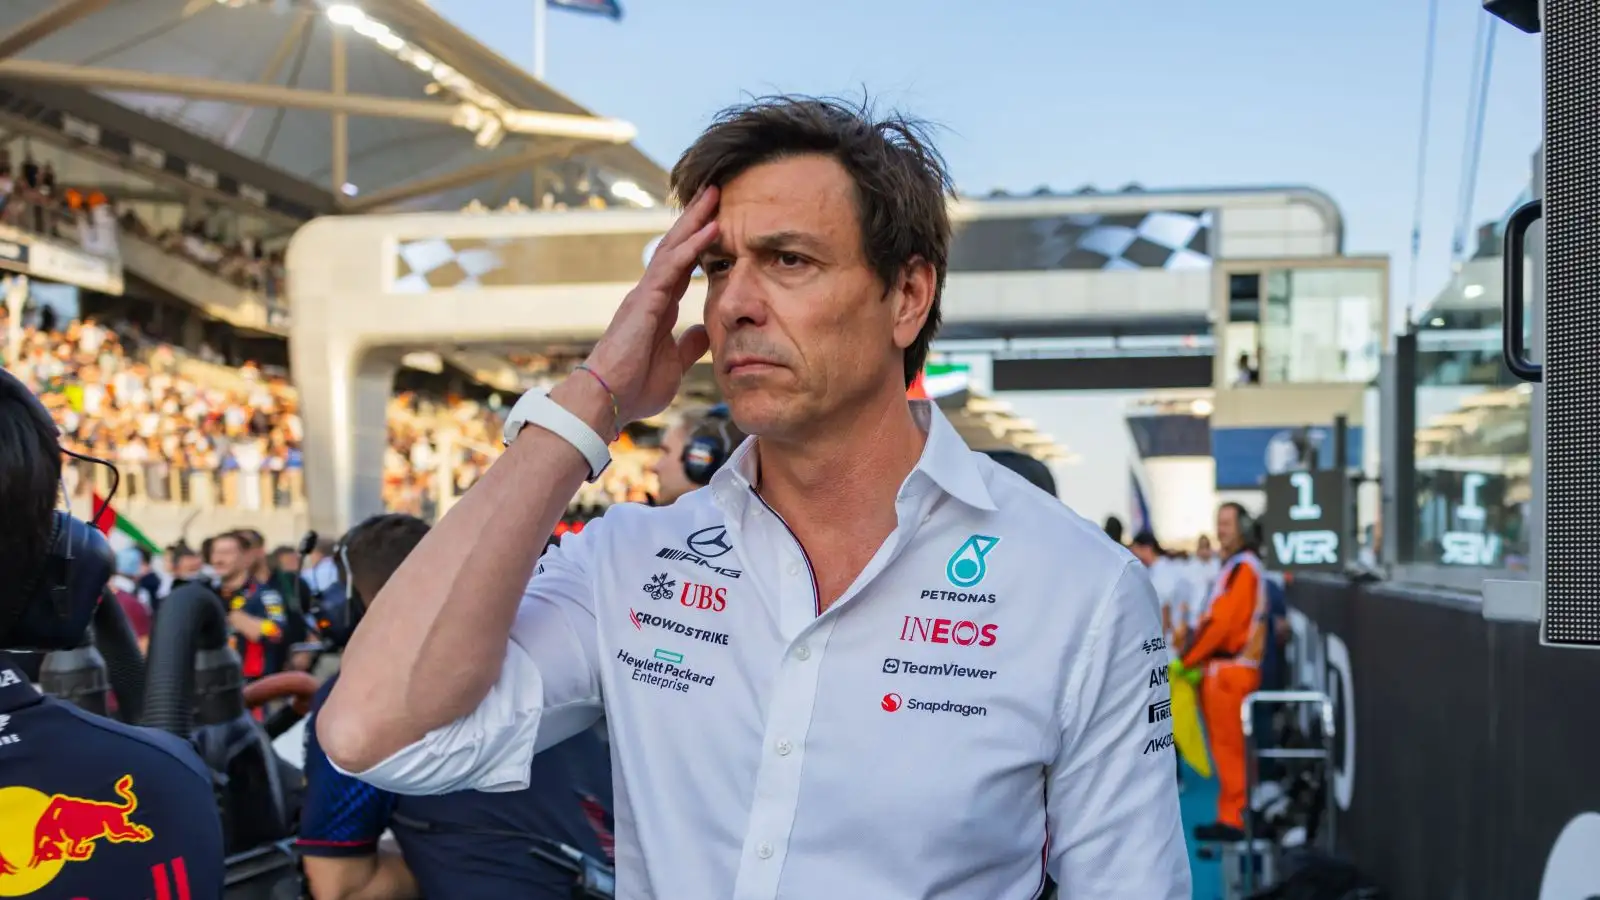 Mercedes boss Toto Wolff on the grid at the 2023 Abu Dhabi Grand Prix.